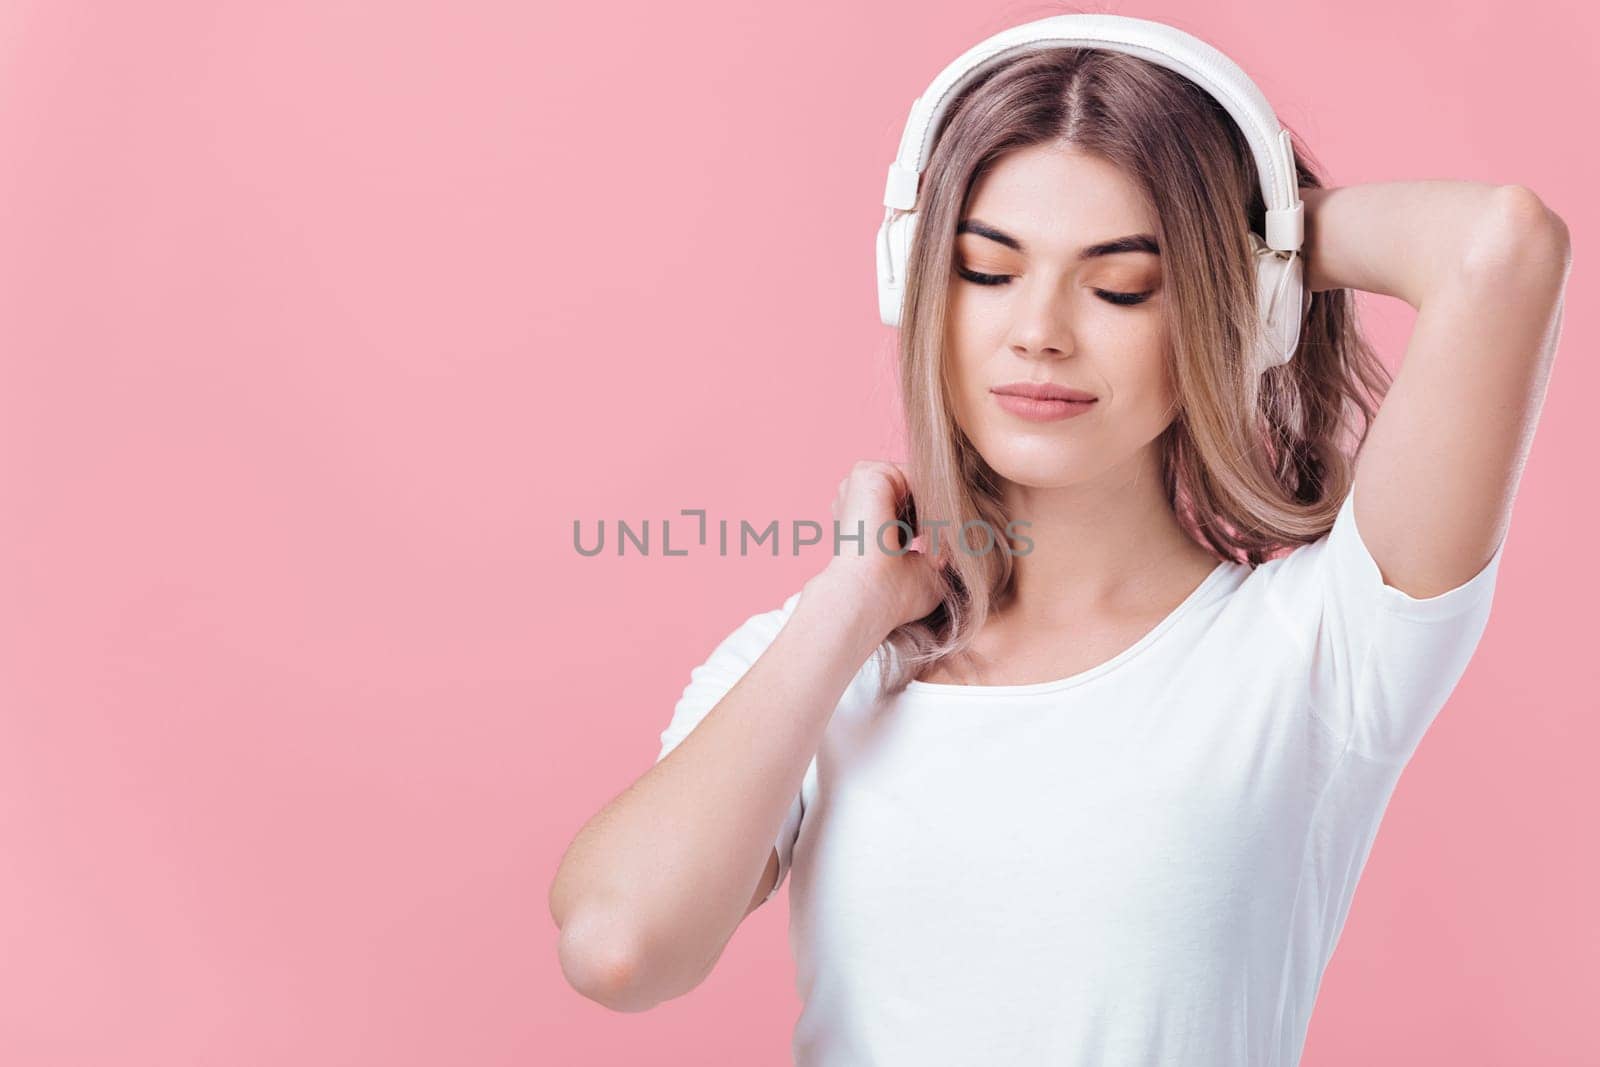 beautiful blonde woman in t-shirt and white headphones enjoying listens to music on pink background